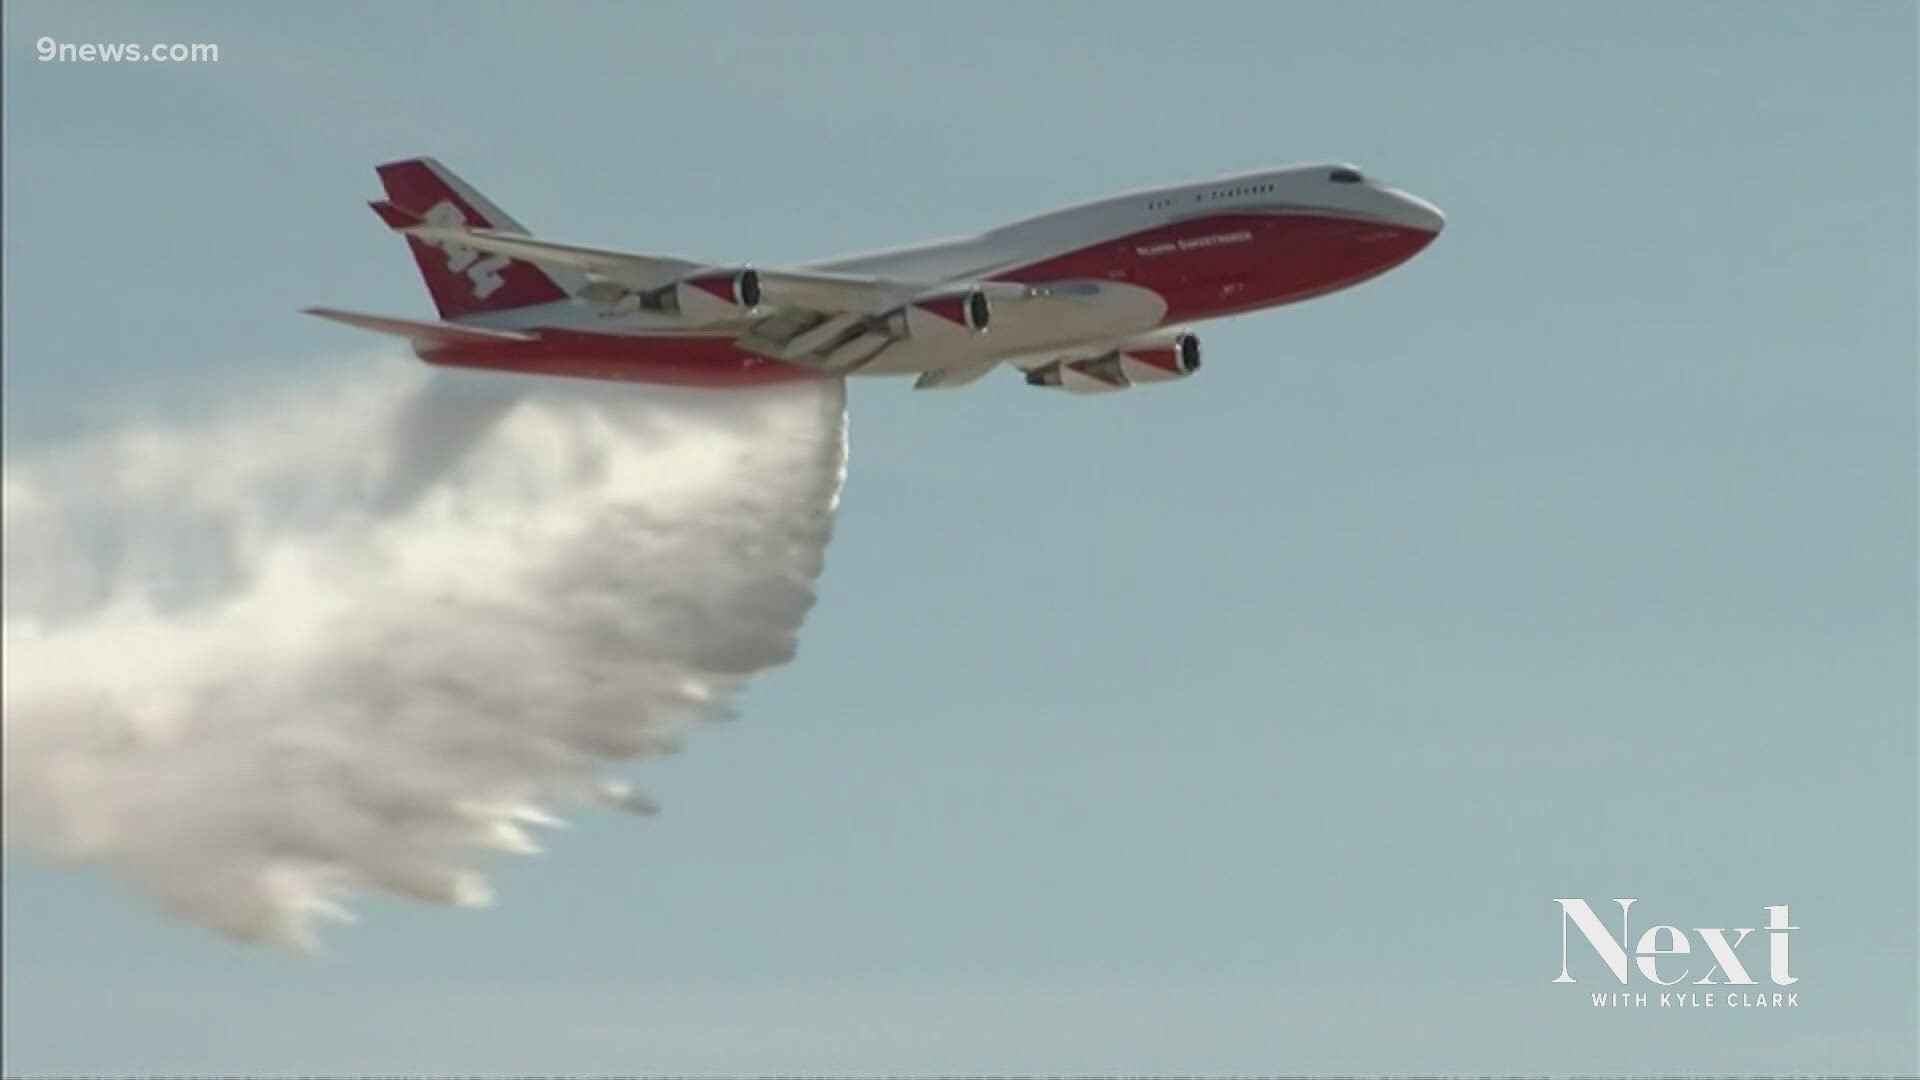 The Global Supertanker, the massive firefighting plane based in Colorado Springs, could leave the firefighting business without ever being used in Colorado.